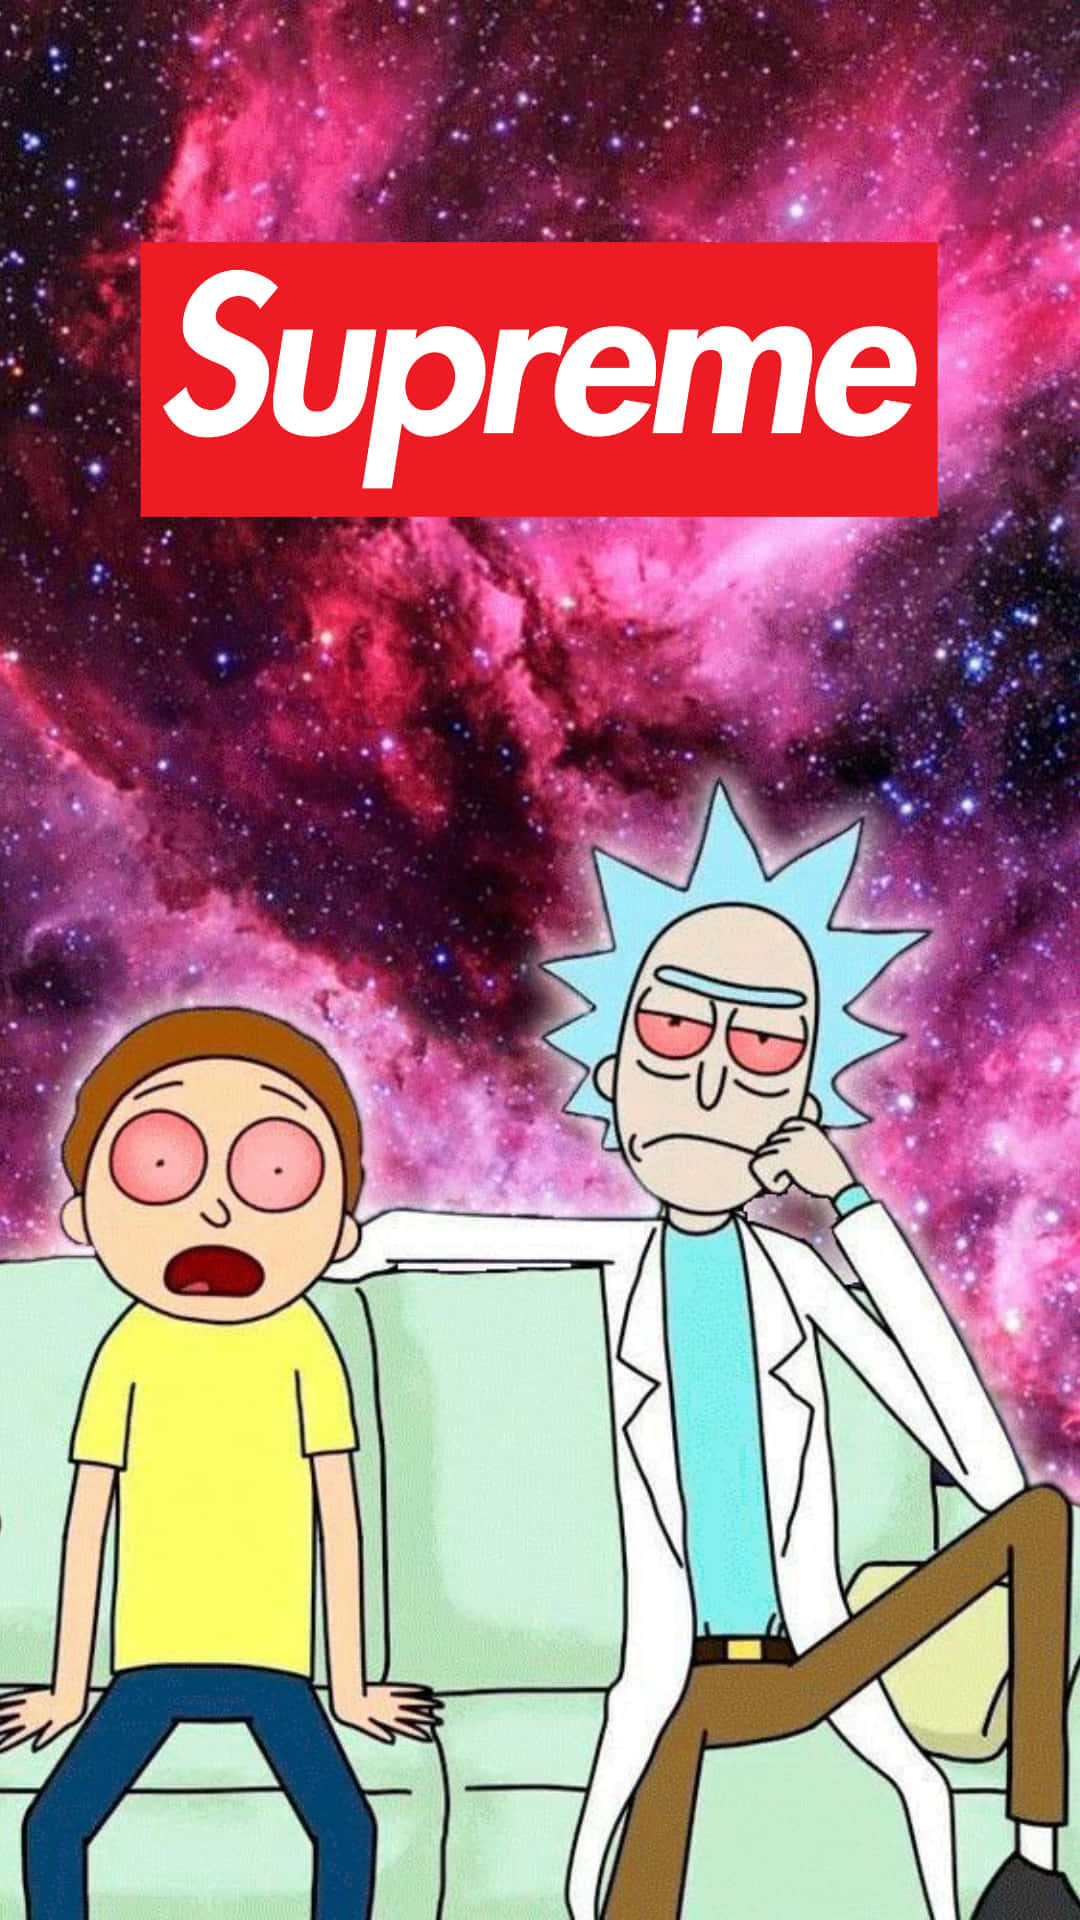 Rick and Morty Supreme wallpaper I made for my phone - Rick and Morty, Supreme